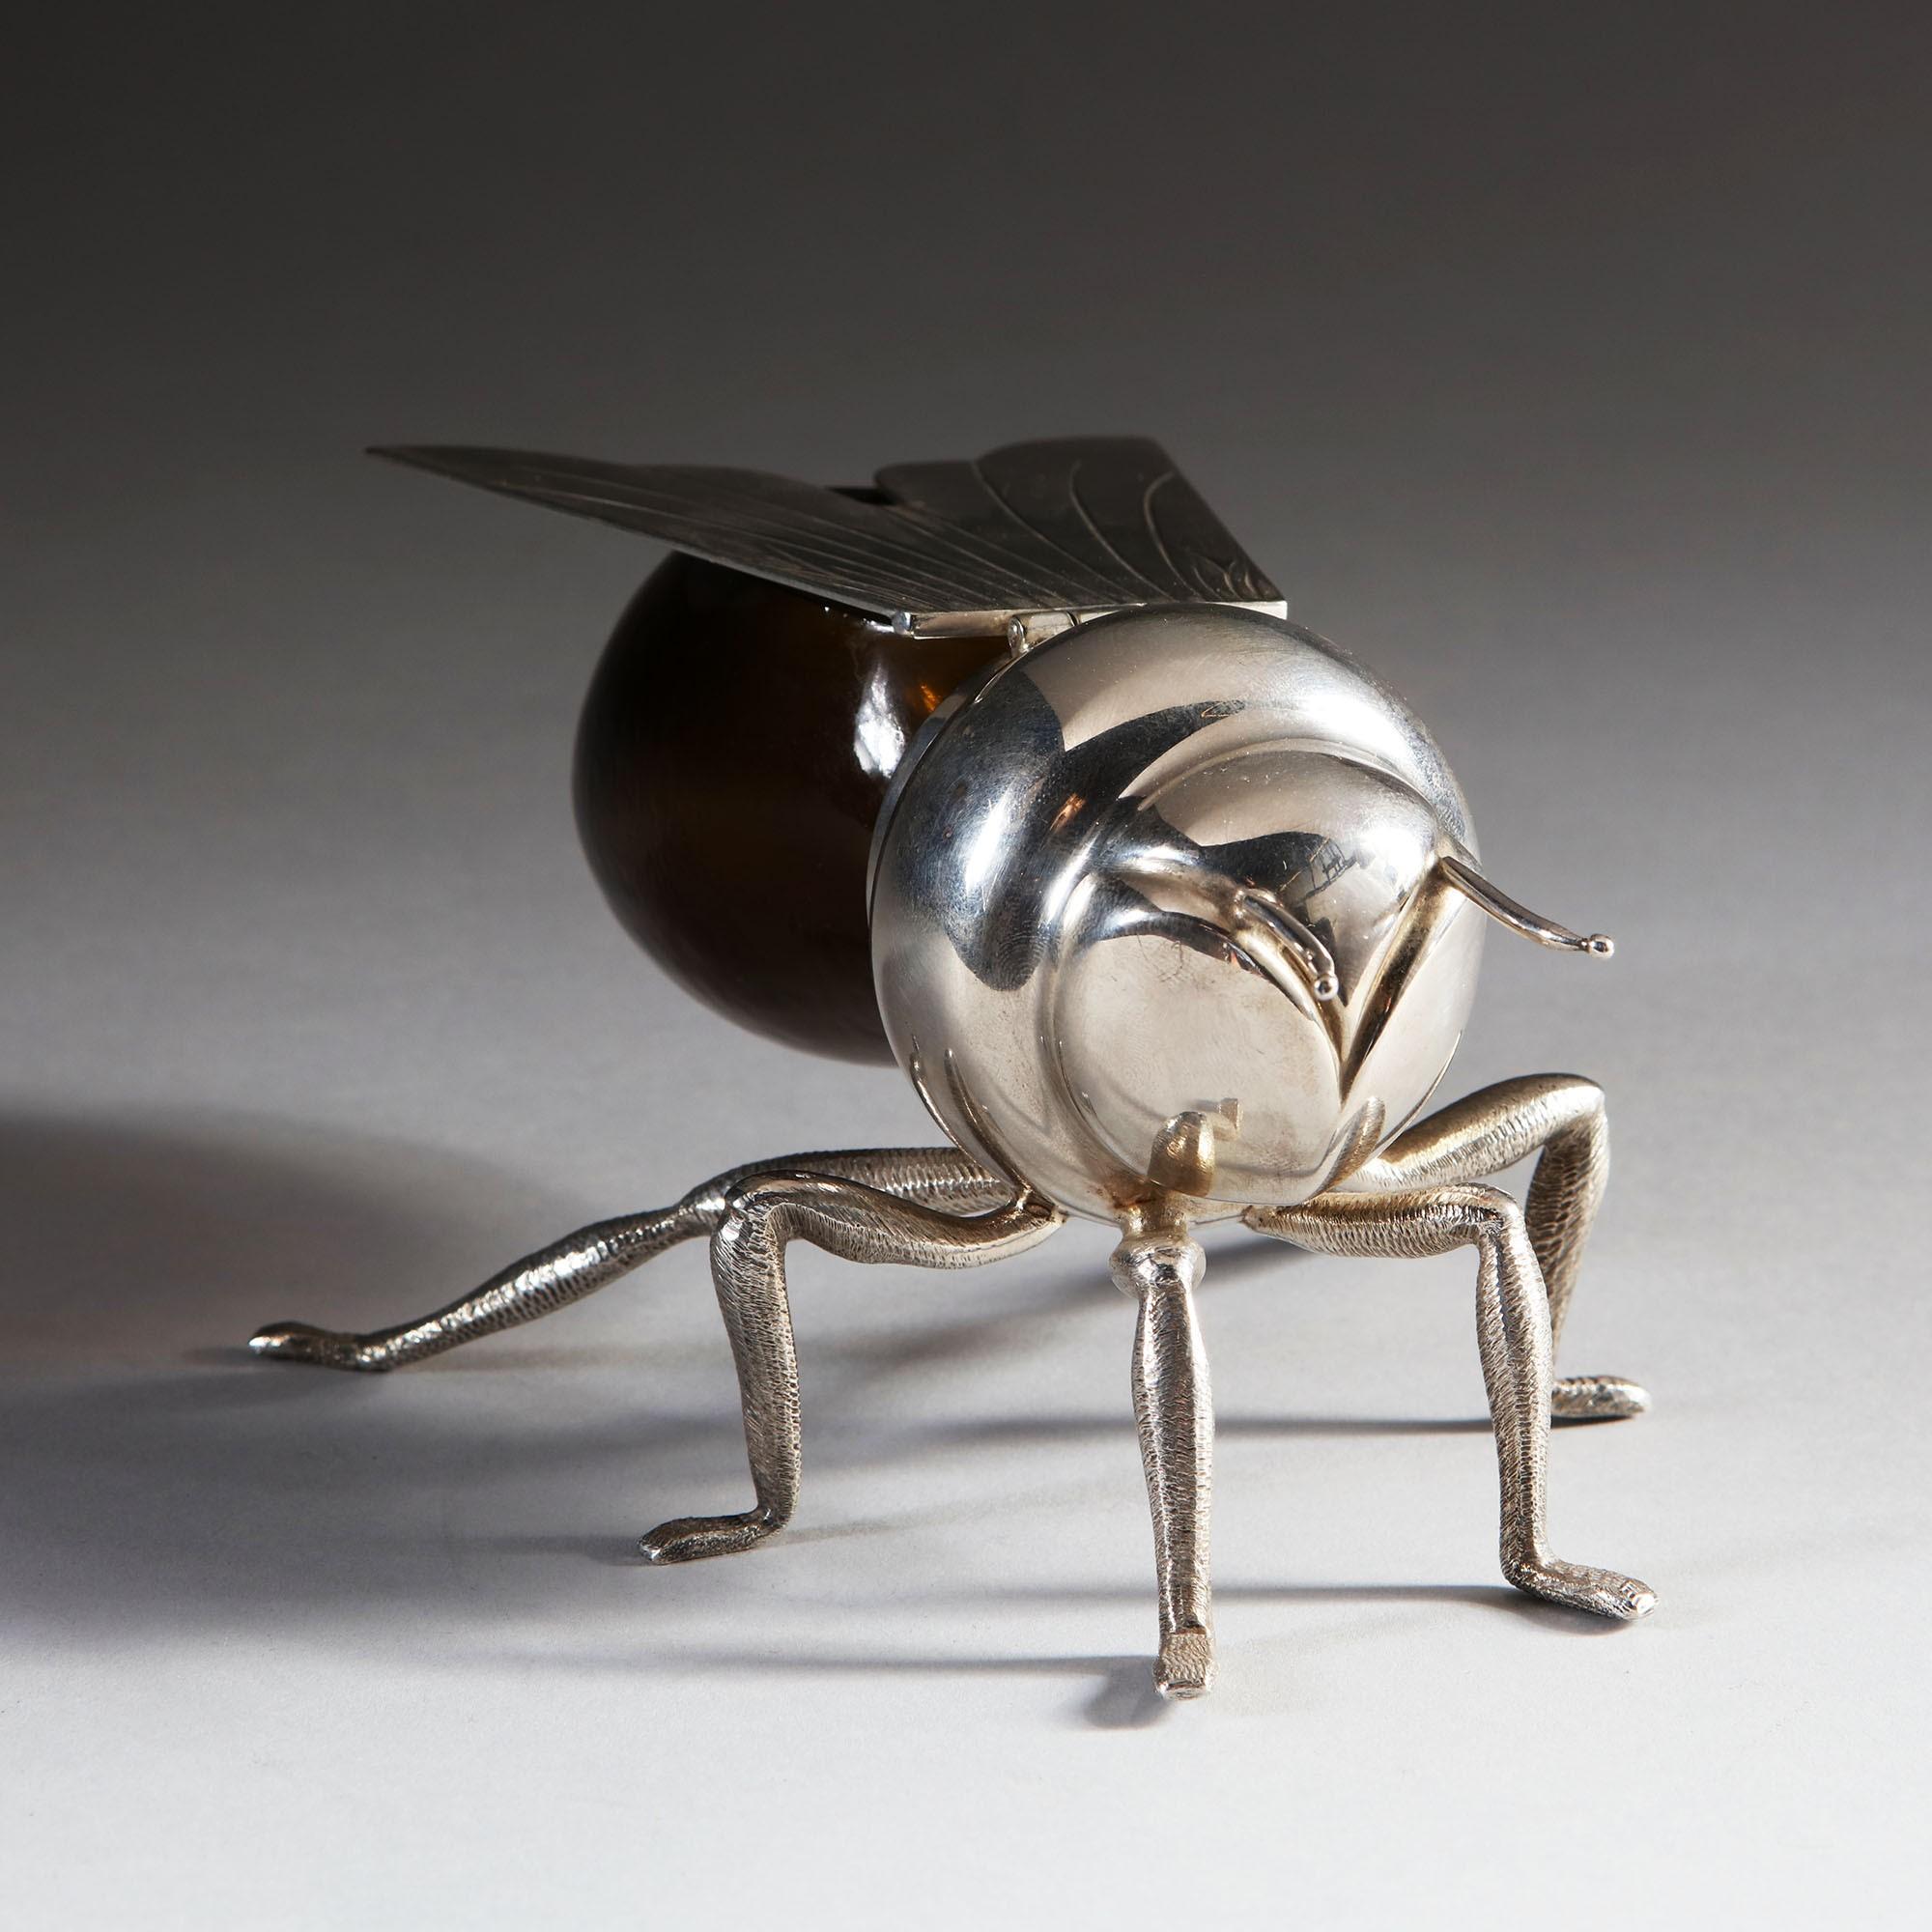 An unusual Edwardian silver plated honey pot in the form of a bee, with amber glass reservoir. Stamped to the underside.

By Mappin and Webb of Regent Street, London.